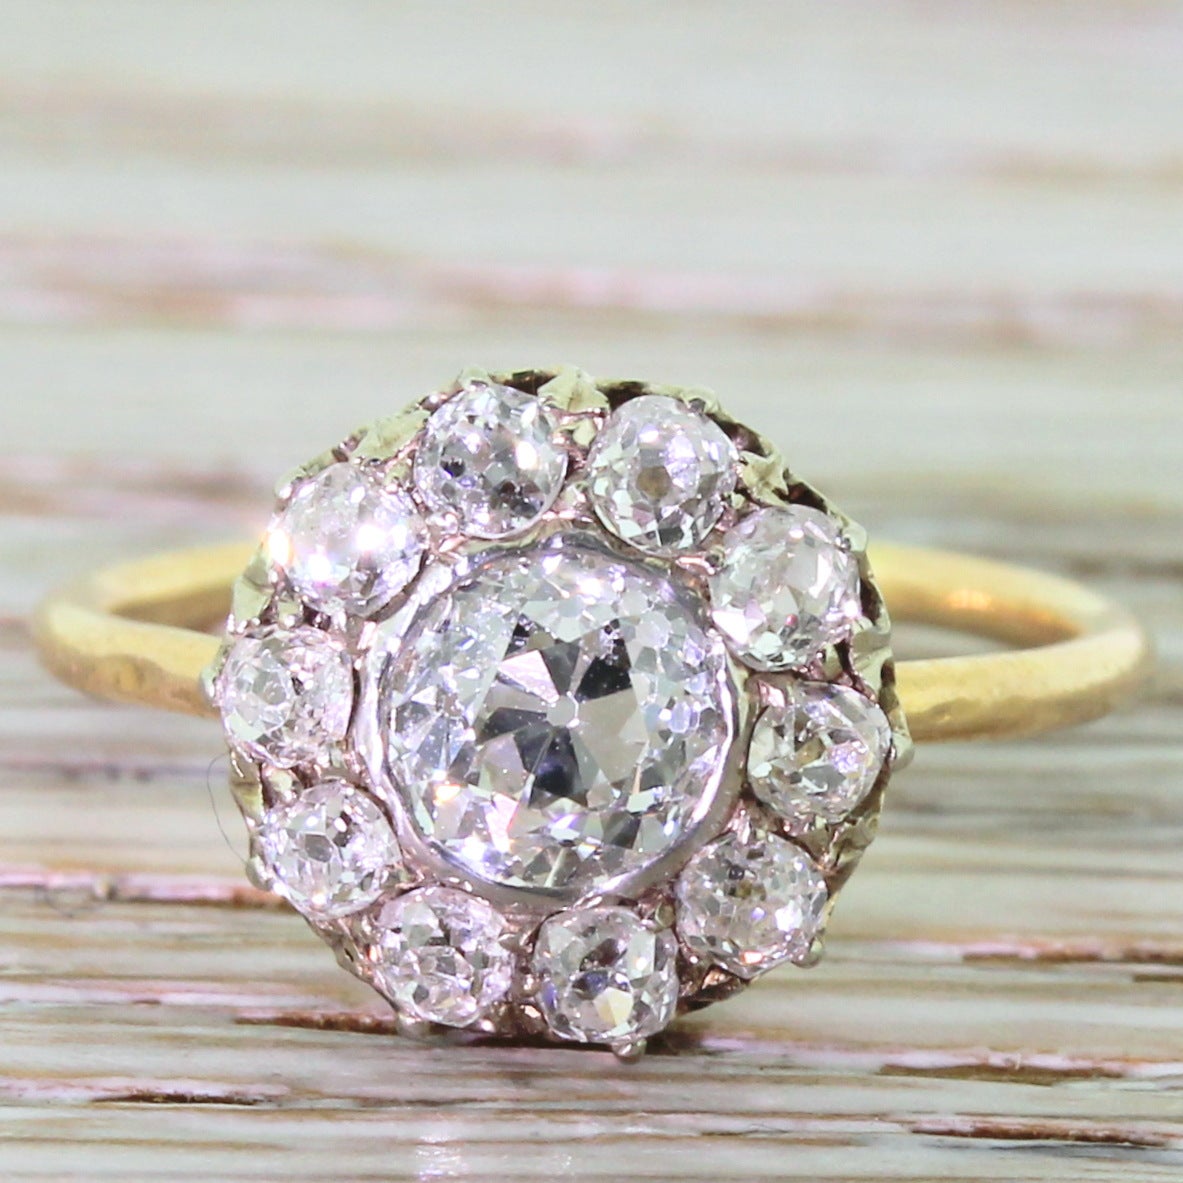 A bright white and clean old mine cut diamond, rubover set with 10 smaller old cut diamonds in the surround. The claw-set smaller diamonds lead to a pierced gallery and a very fine, simple gold band. Although this sits nice and close to the finger,